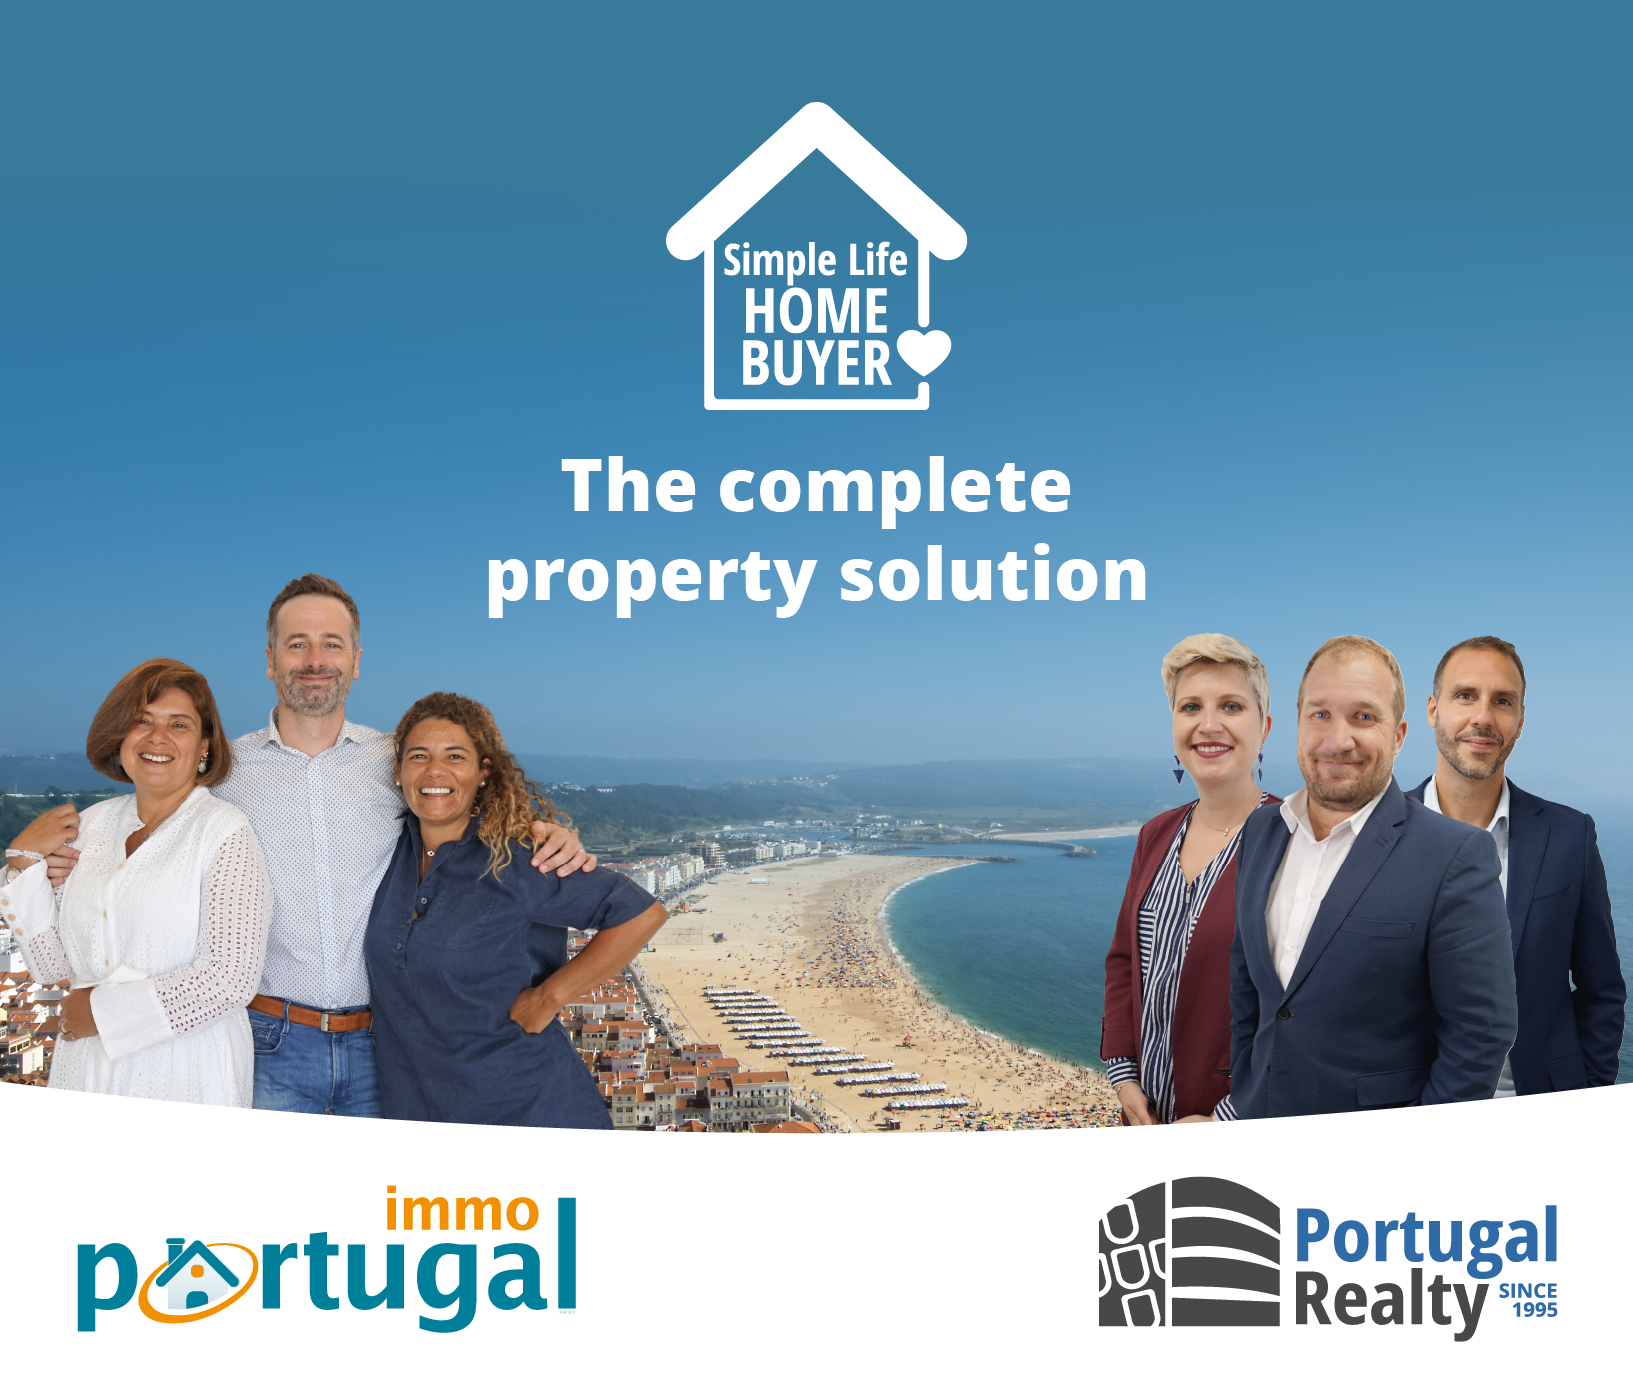 Portugal Realty I ImmoPortugal